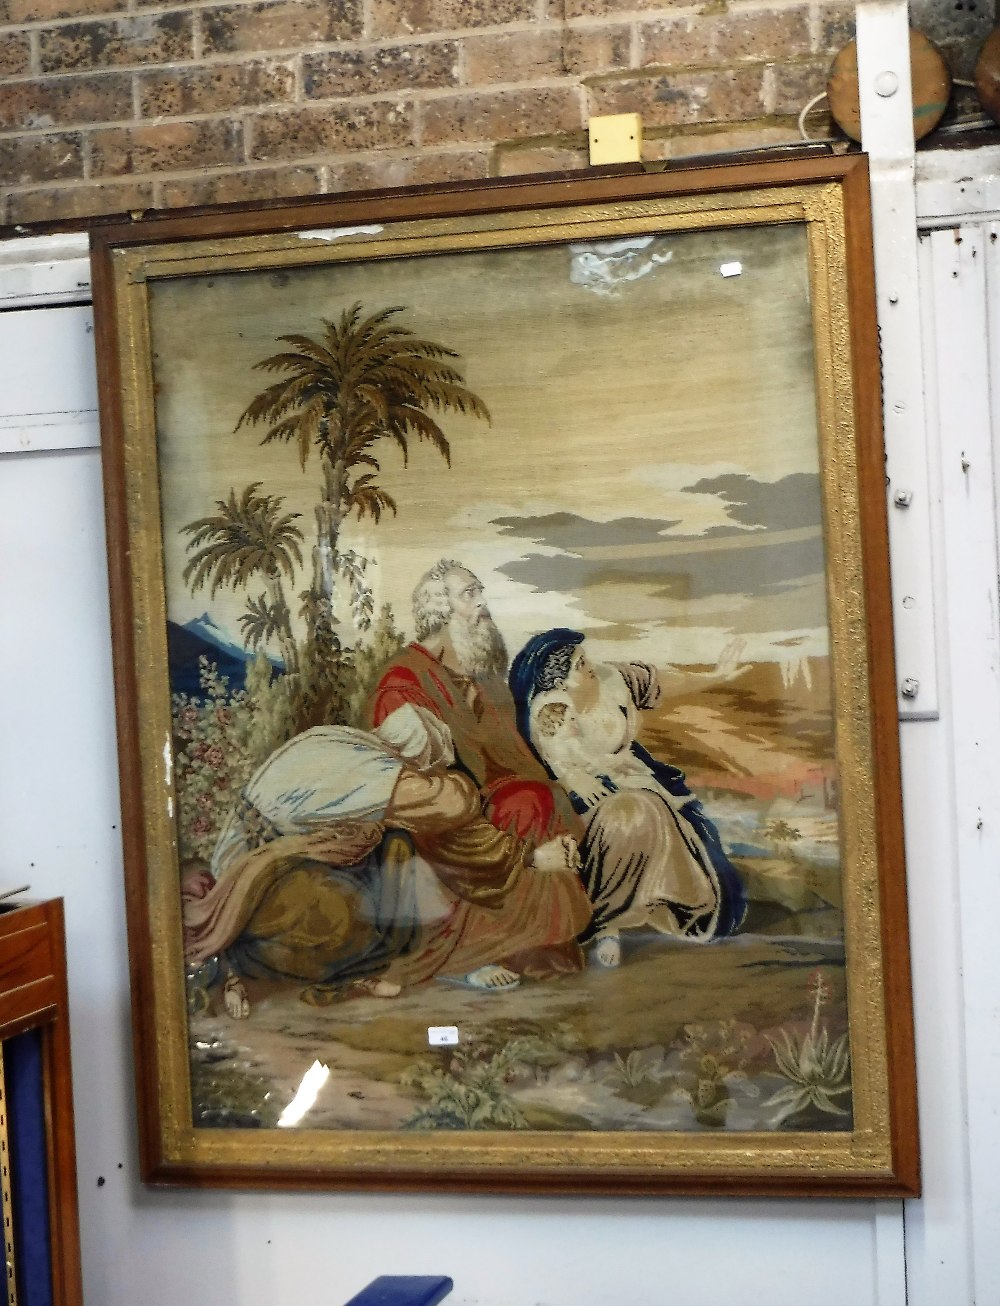 A LARGE VICTORIAN NEEDLEWORK depicting "The flight into Egypt", 127 cm high